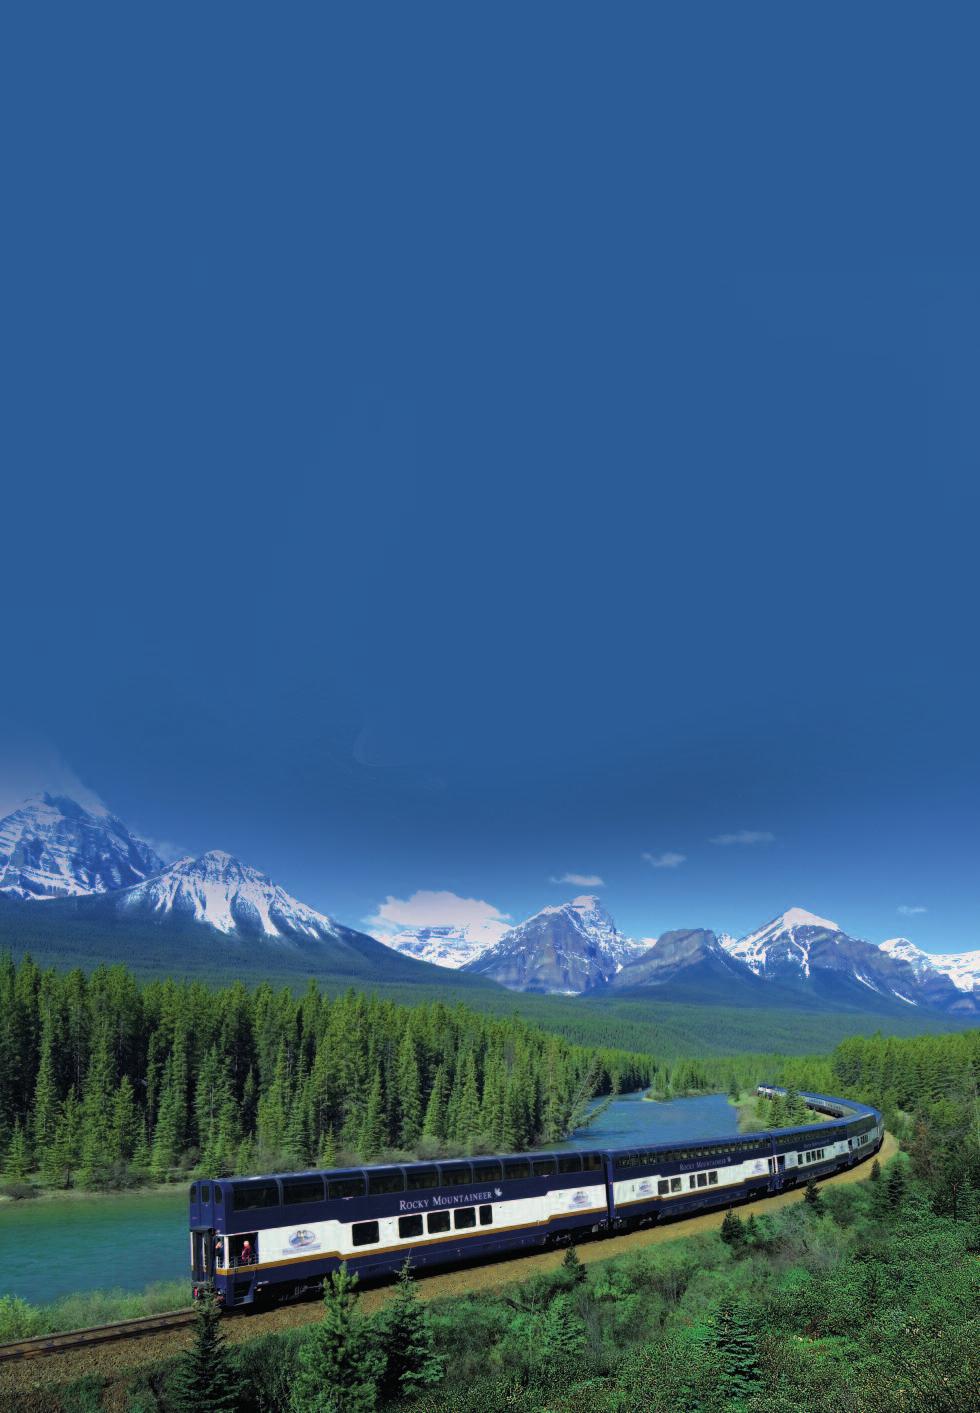 ROCKY MOUNTAINEER 2014 Alaskan Cruise and the Canadian Rocky Mountaineer Departures Dates Available 2014 May - 6th, 13th, 20th, 27th Jun - 3rd, 10th,